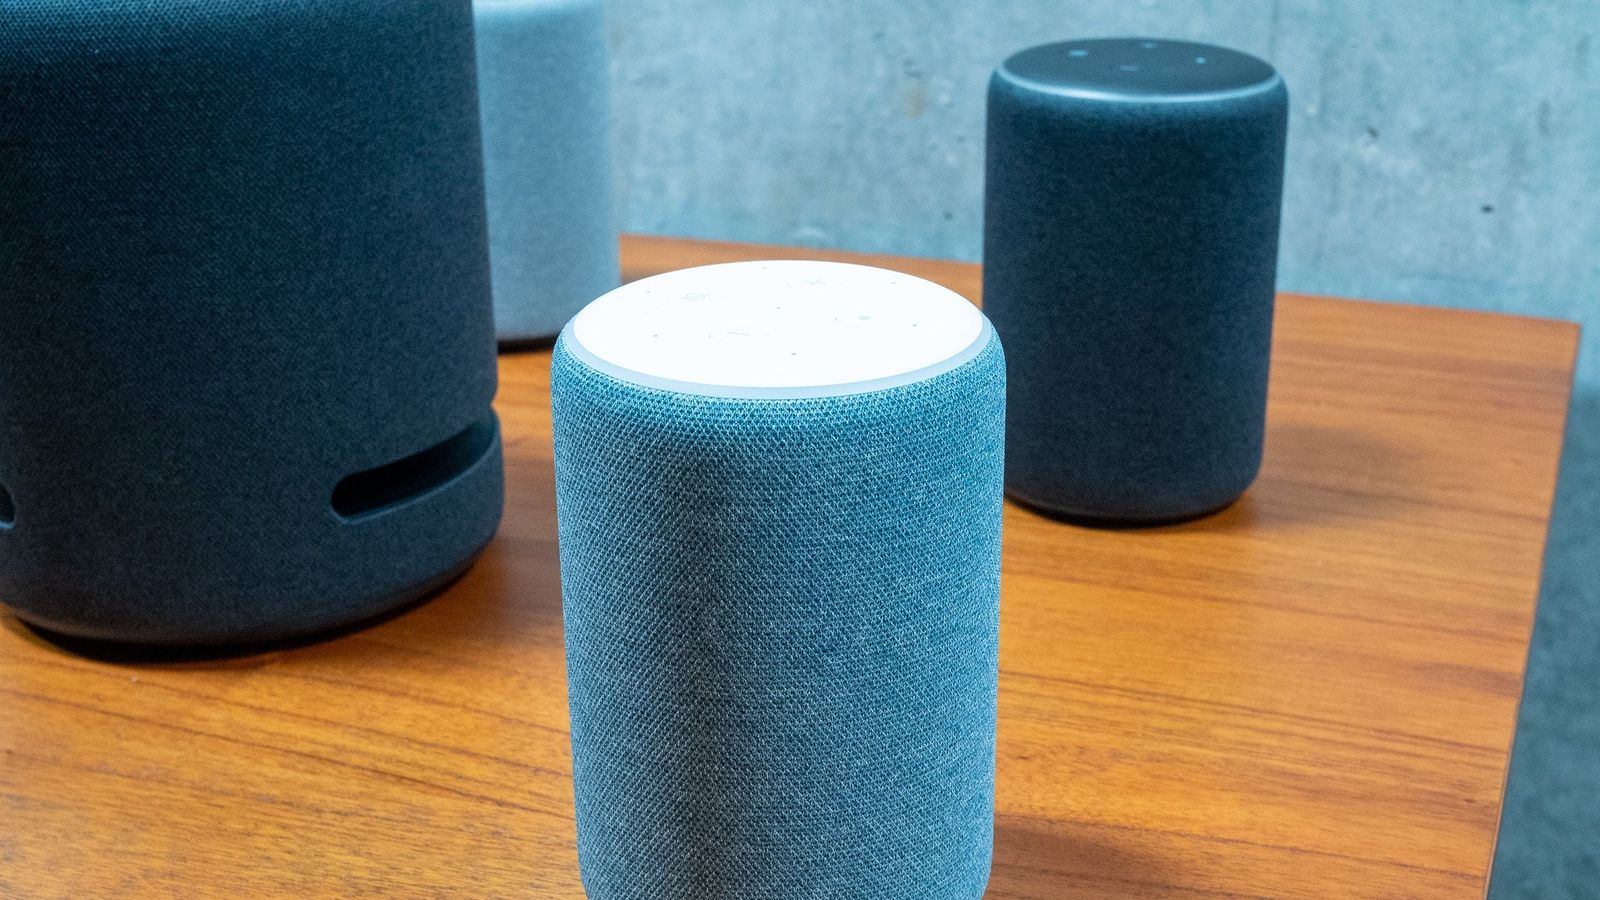 How to pair two Amazon Echo speakers to 